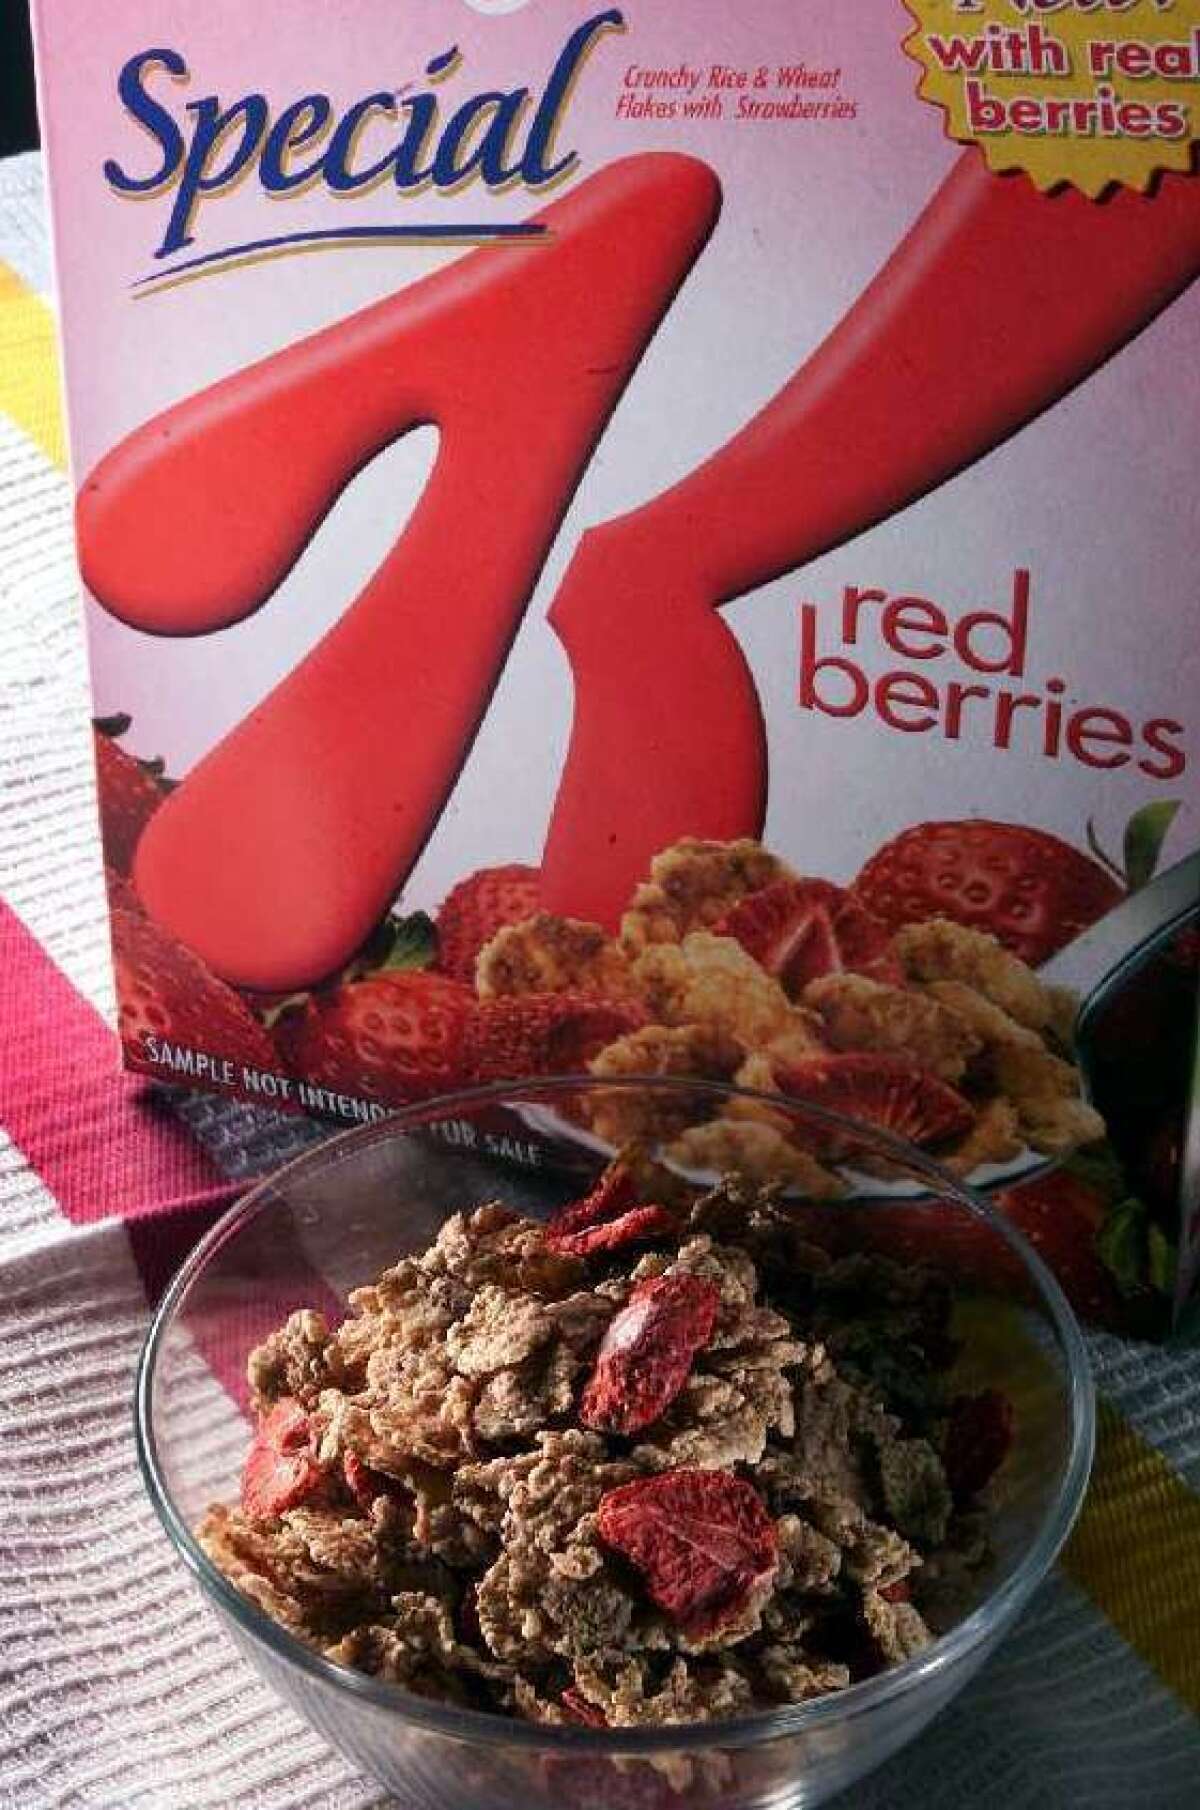 Kellogg's has recalled some packages of Special K Red Berries cereal.